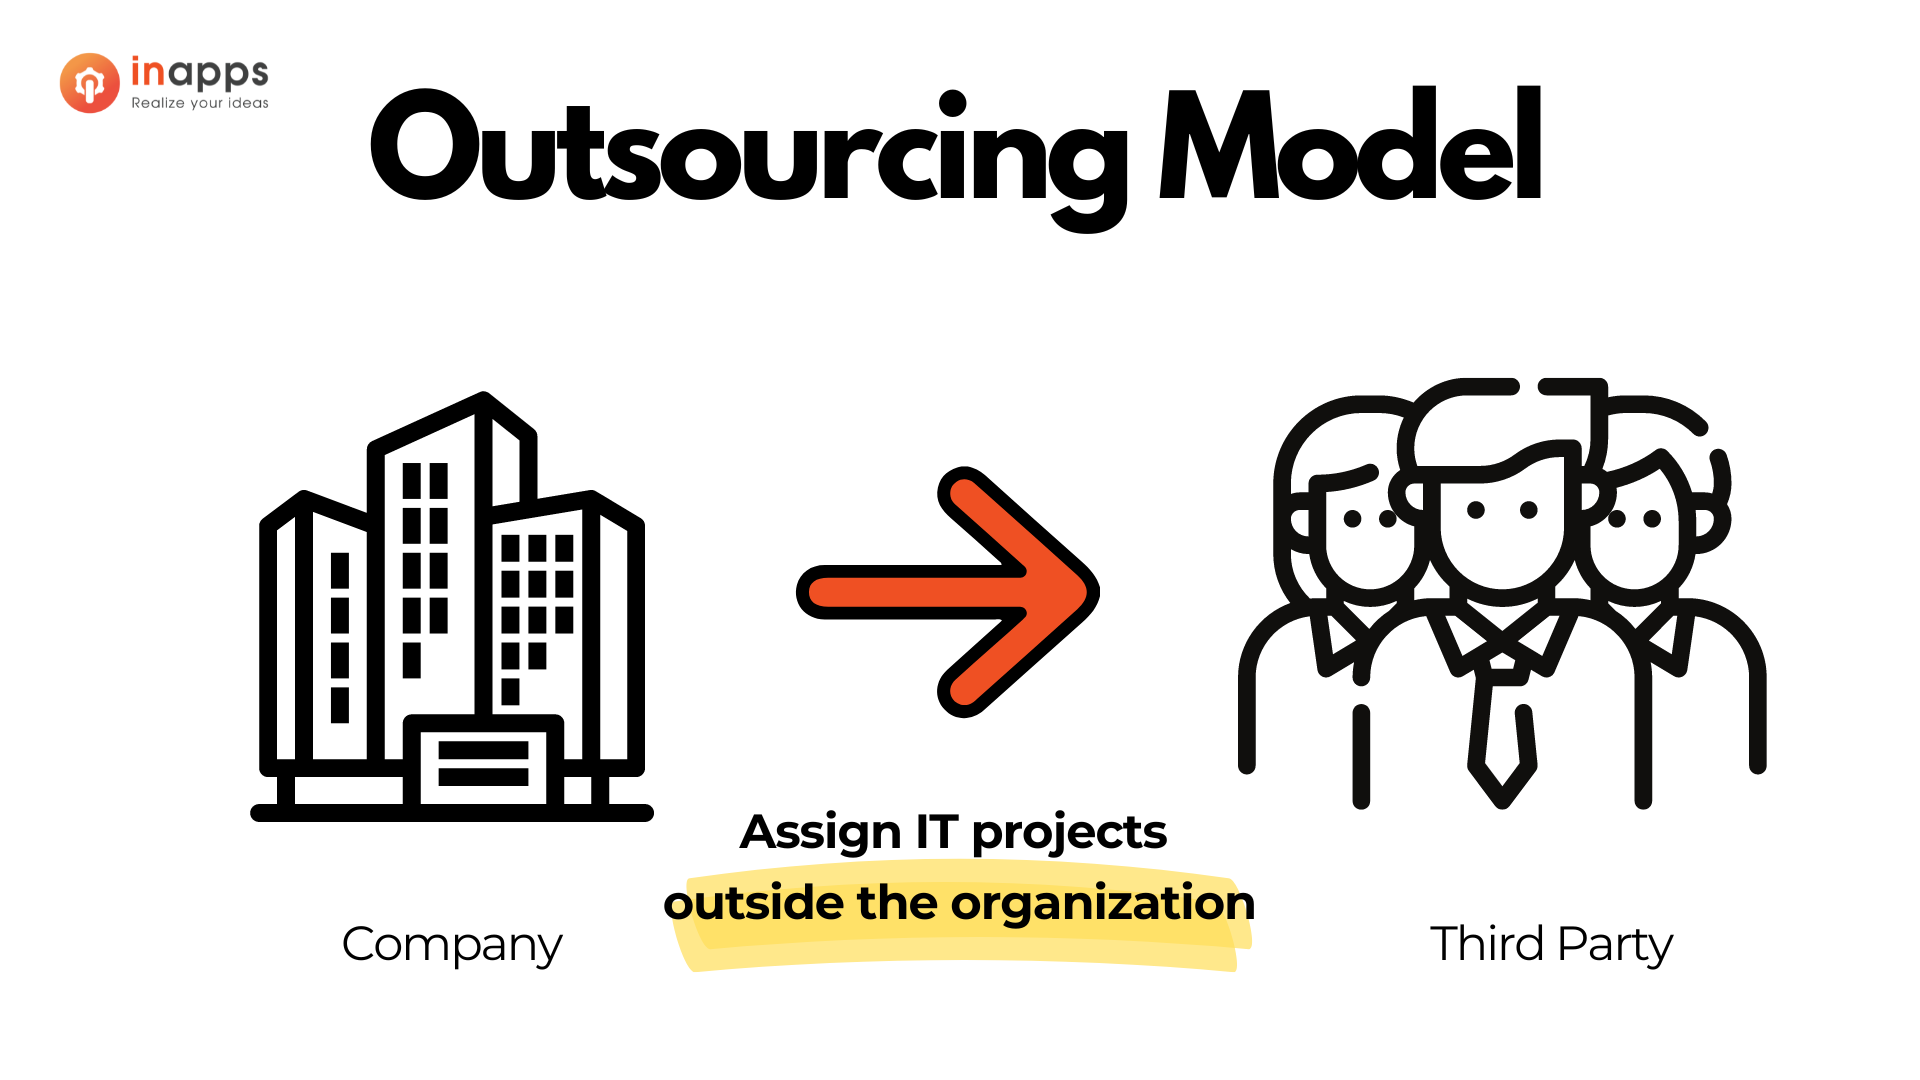 outsourcing model - Inapps